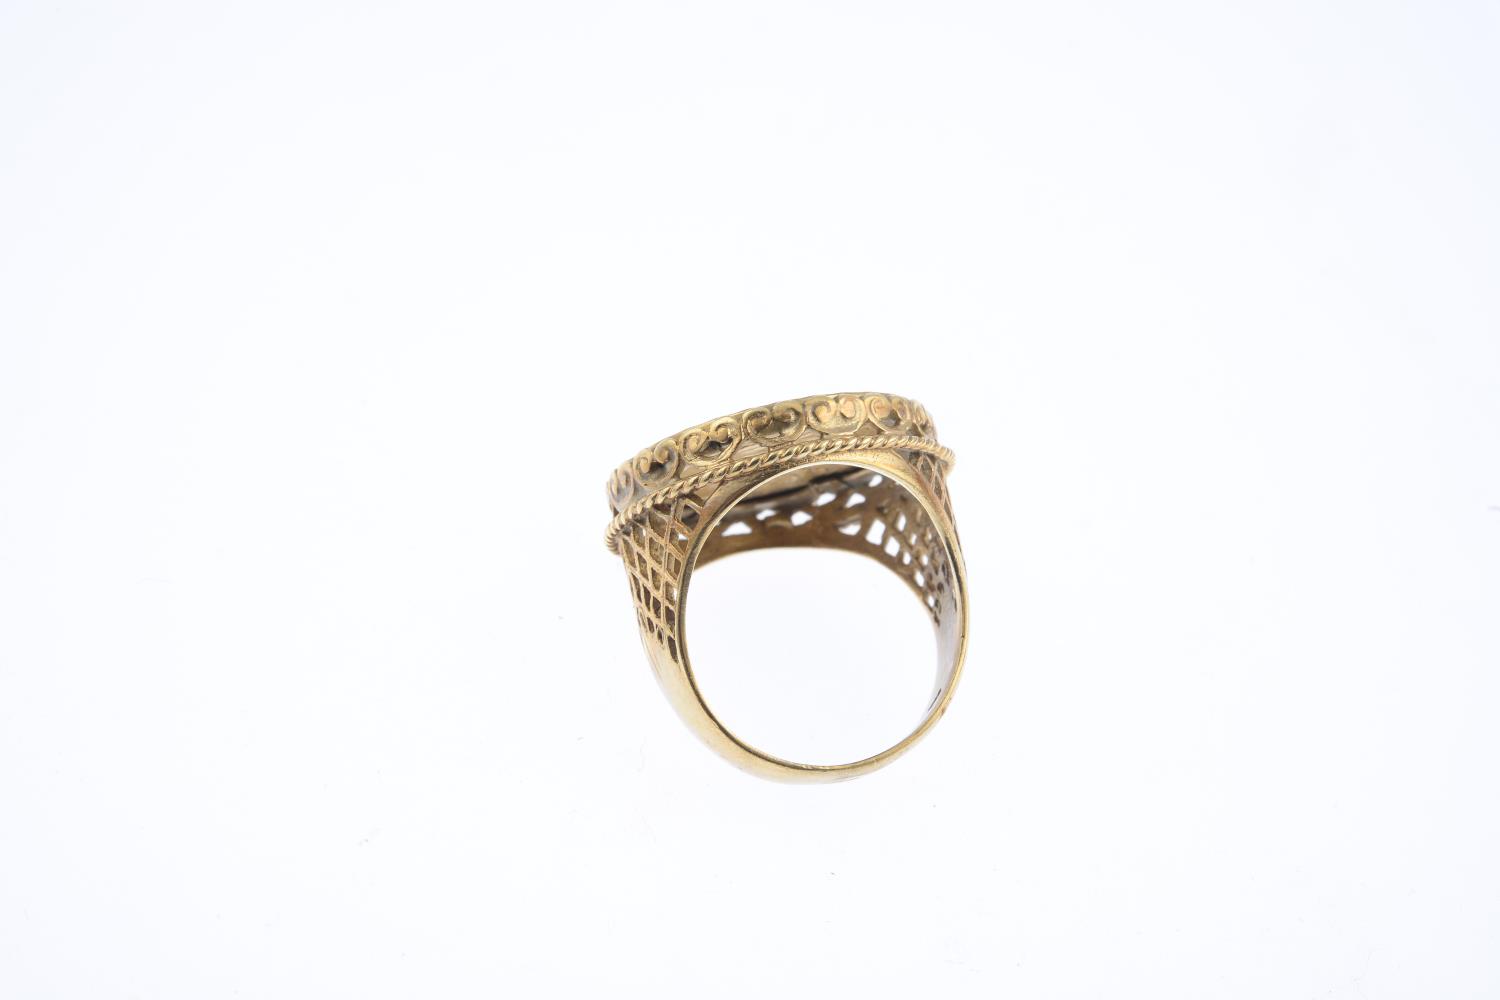 (209869) A 9ct gold mounted full sovereign ring. - Image 2 of 3